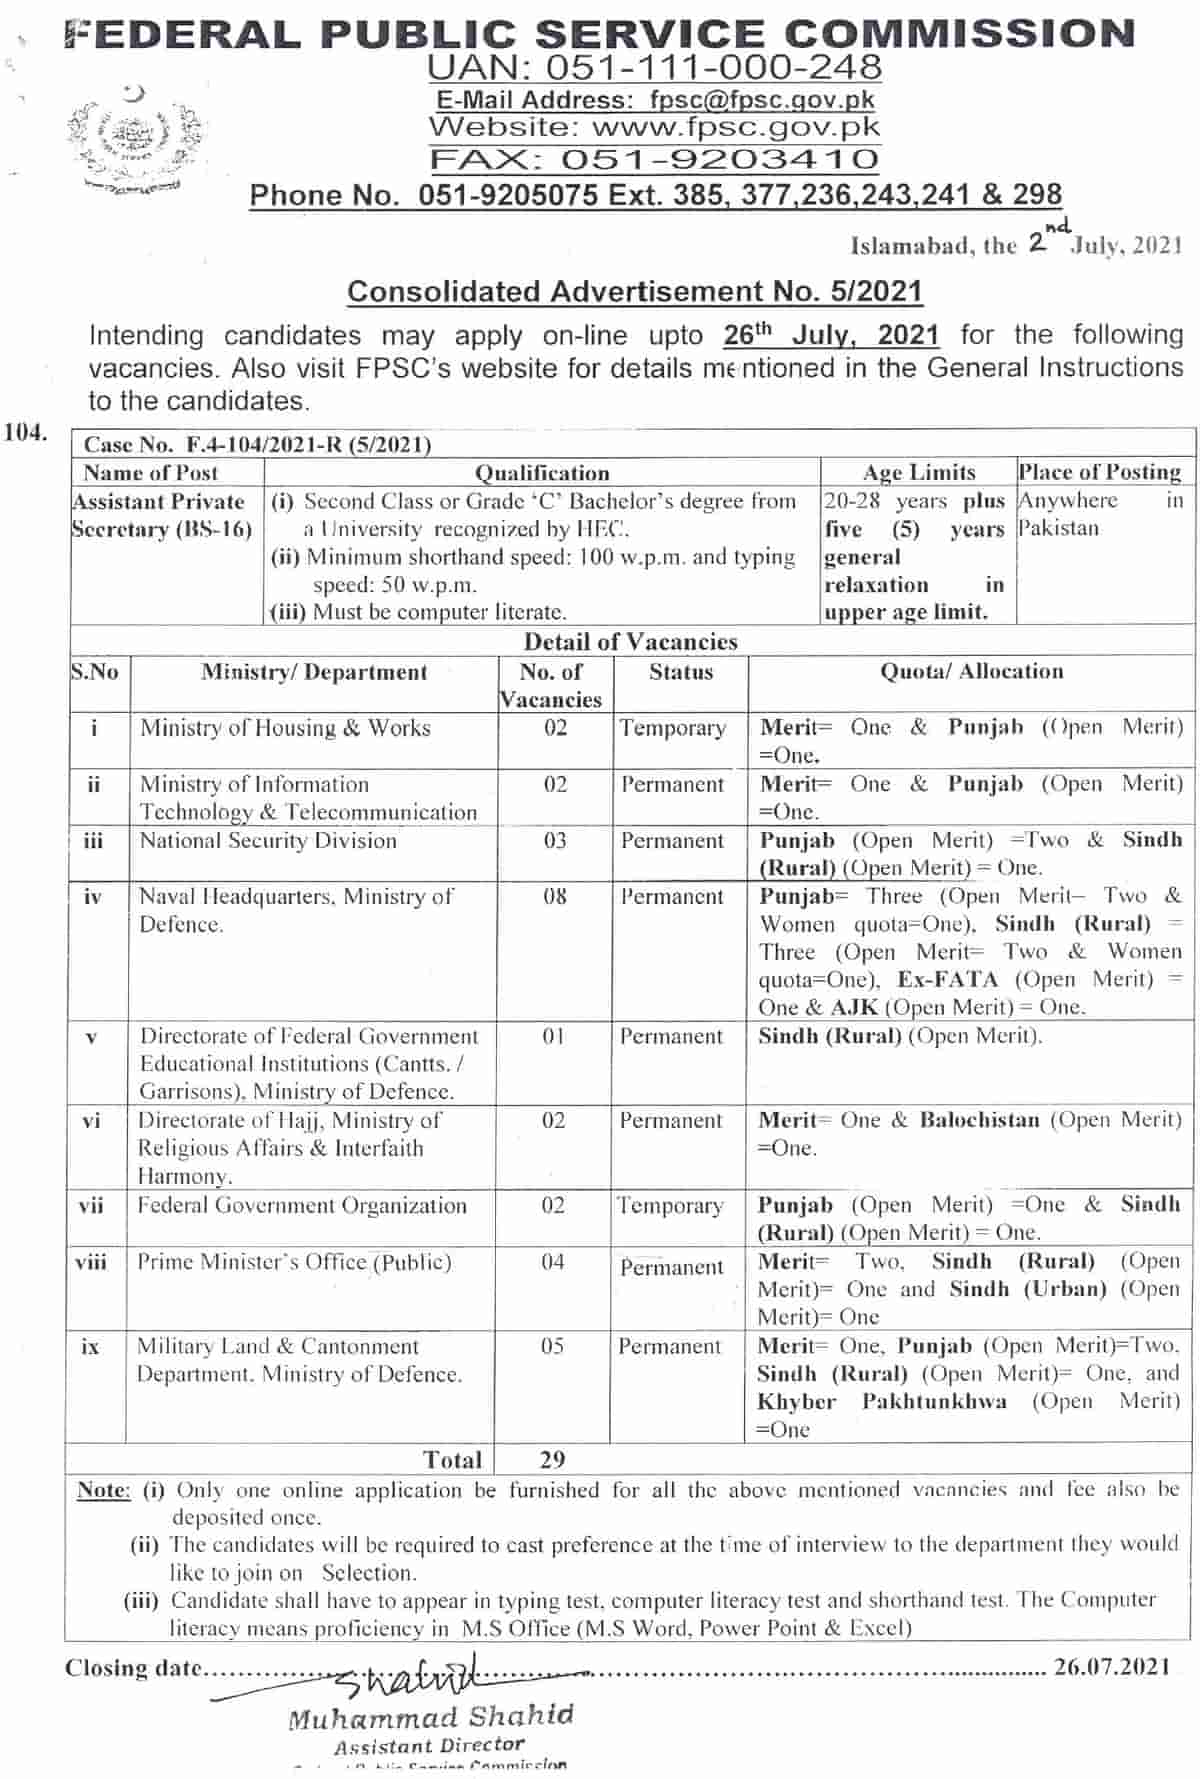 FPSC Jobs 2021 Consolidated Advertisement No 5 www.fpsc.gov.pk Apply Online Latest 1